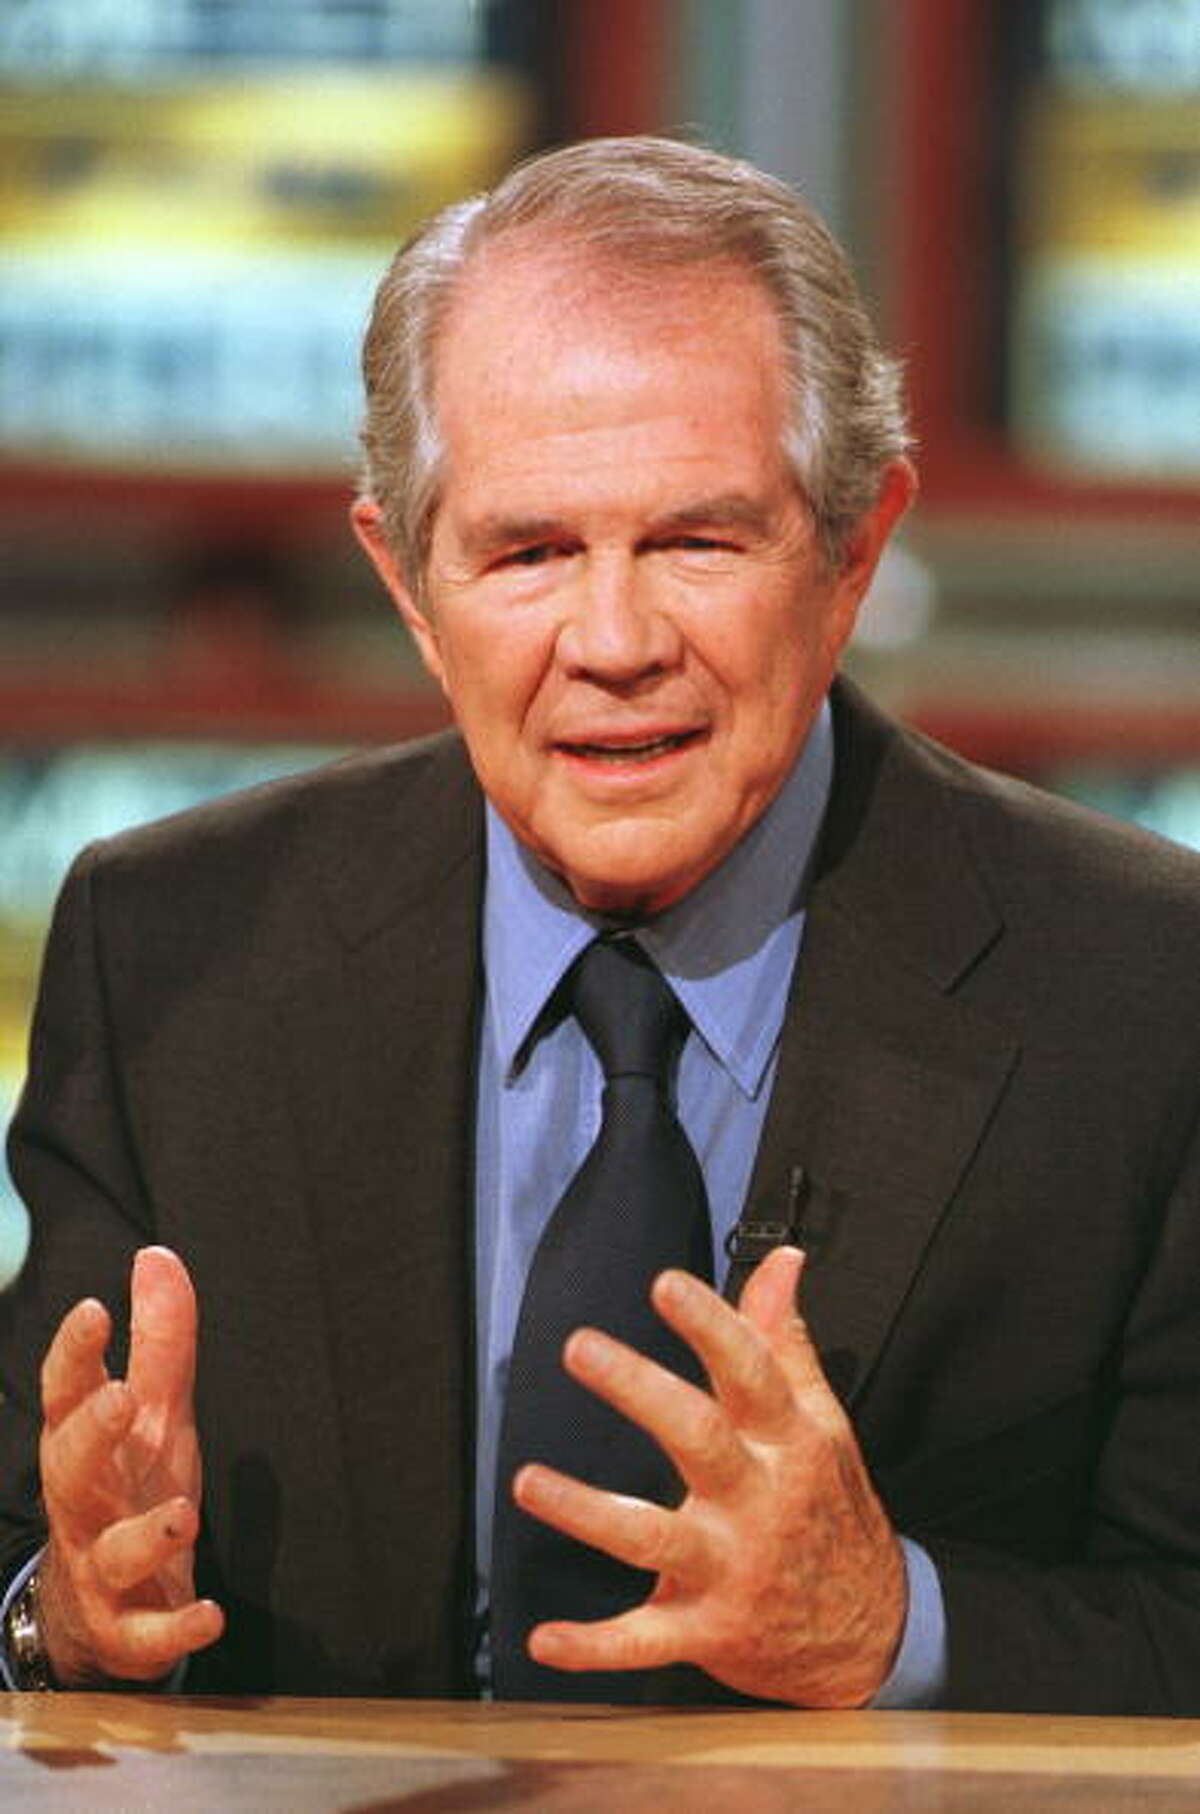 Christian Coalition President Pat Robertson appears on NBC's "Meet the Press" May 7, 2000 in Washington, DC.